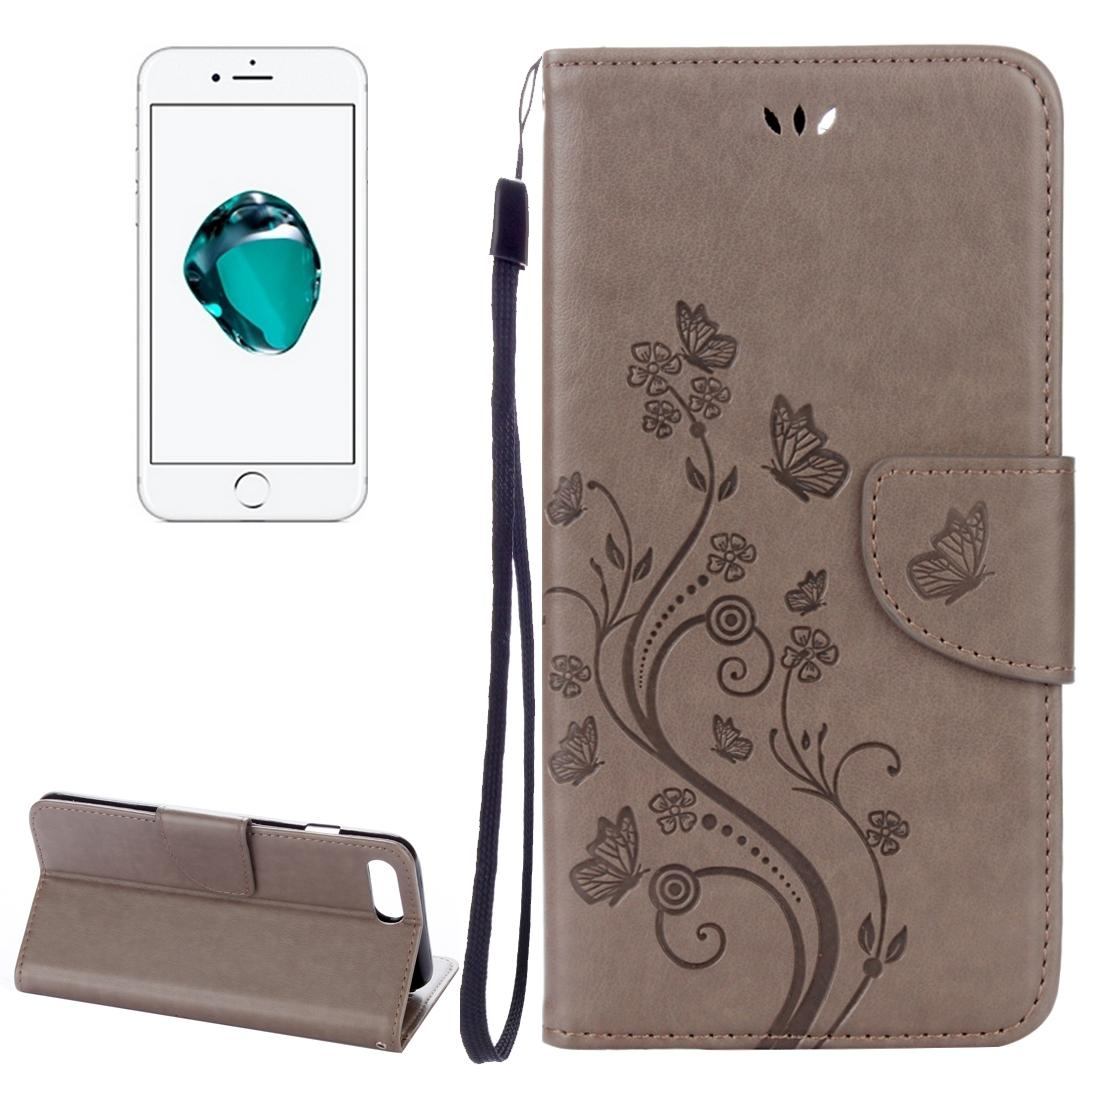 For iPhone 8 PLUS,7 PLUS Wallet Case,Fancy Butterflies Emboss Leather Cover,Grey